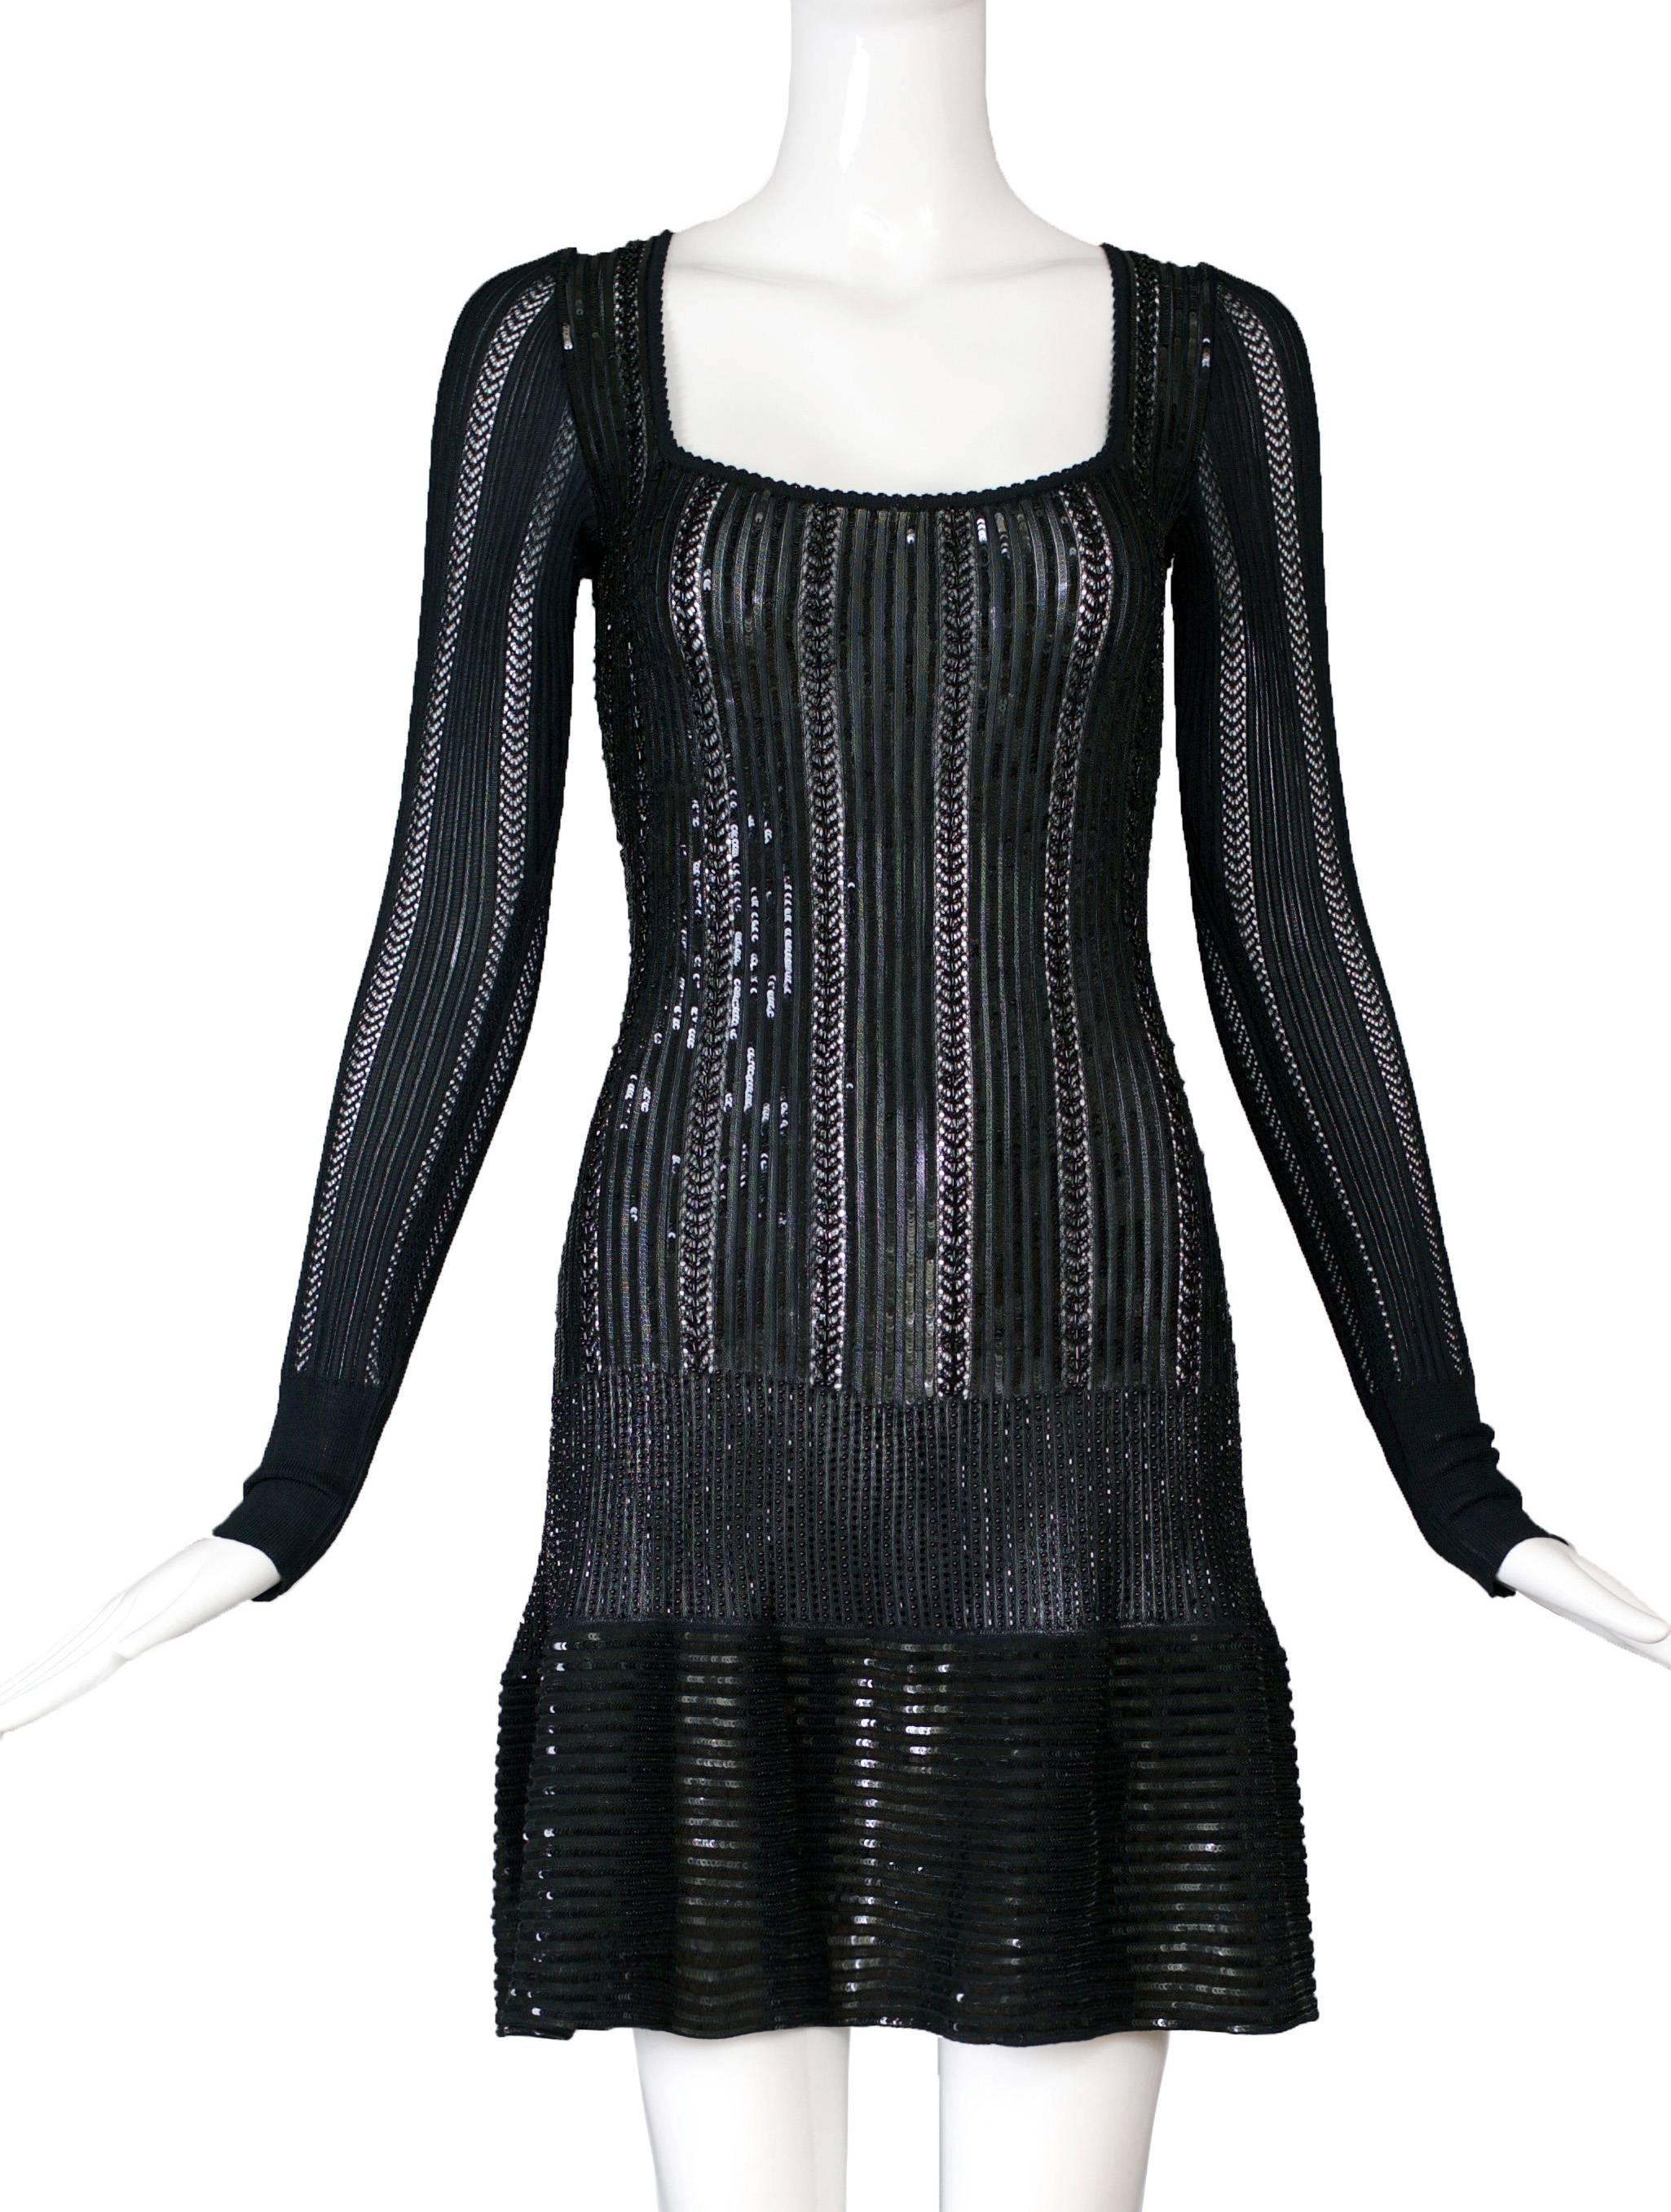 Stunning, rare Azzedine Alaia black hand-beaded and sequined bodycon knit viscose cocktail dress with long sleeves and scooped neck. Size tag small. In excellent condition. 
MEASUREMENTS:
Bust - (approx.) 32